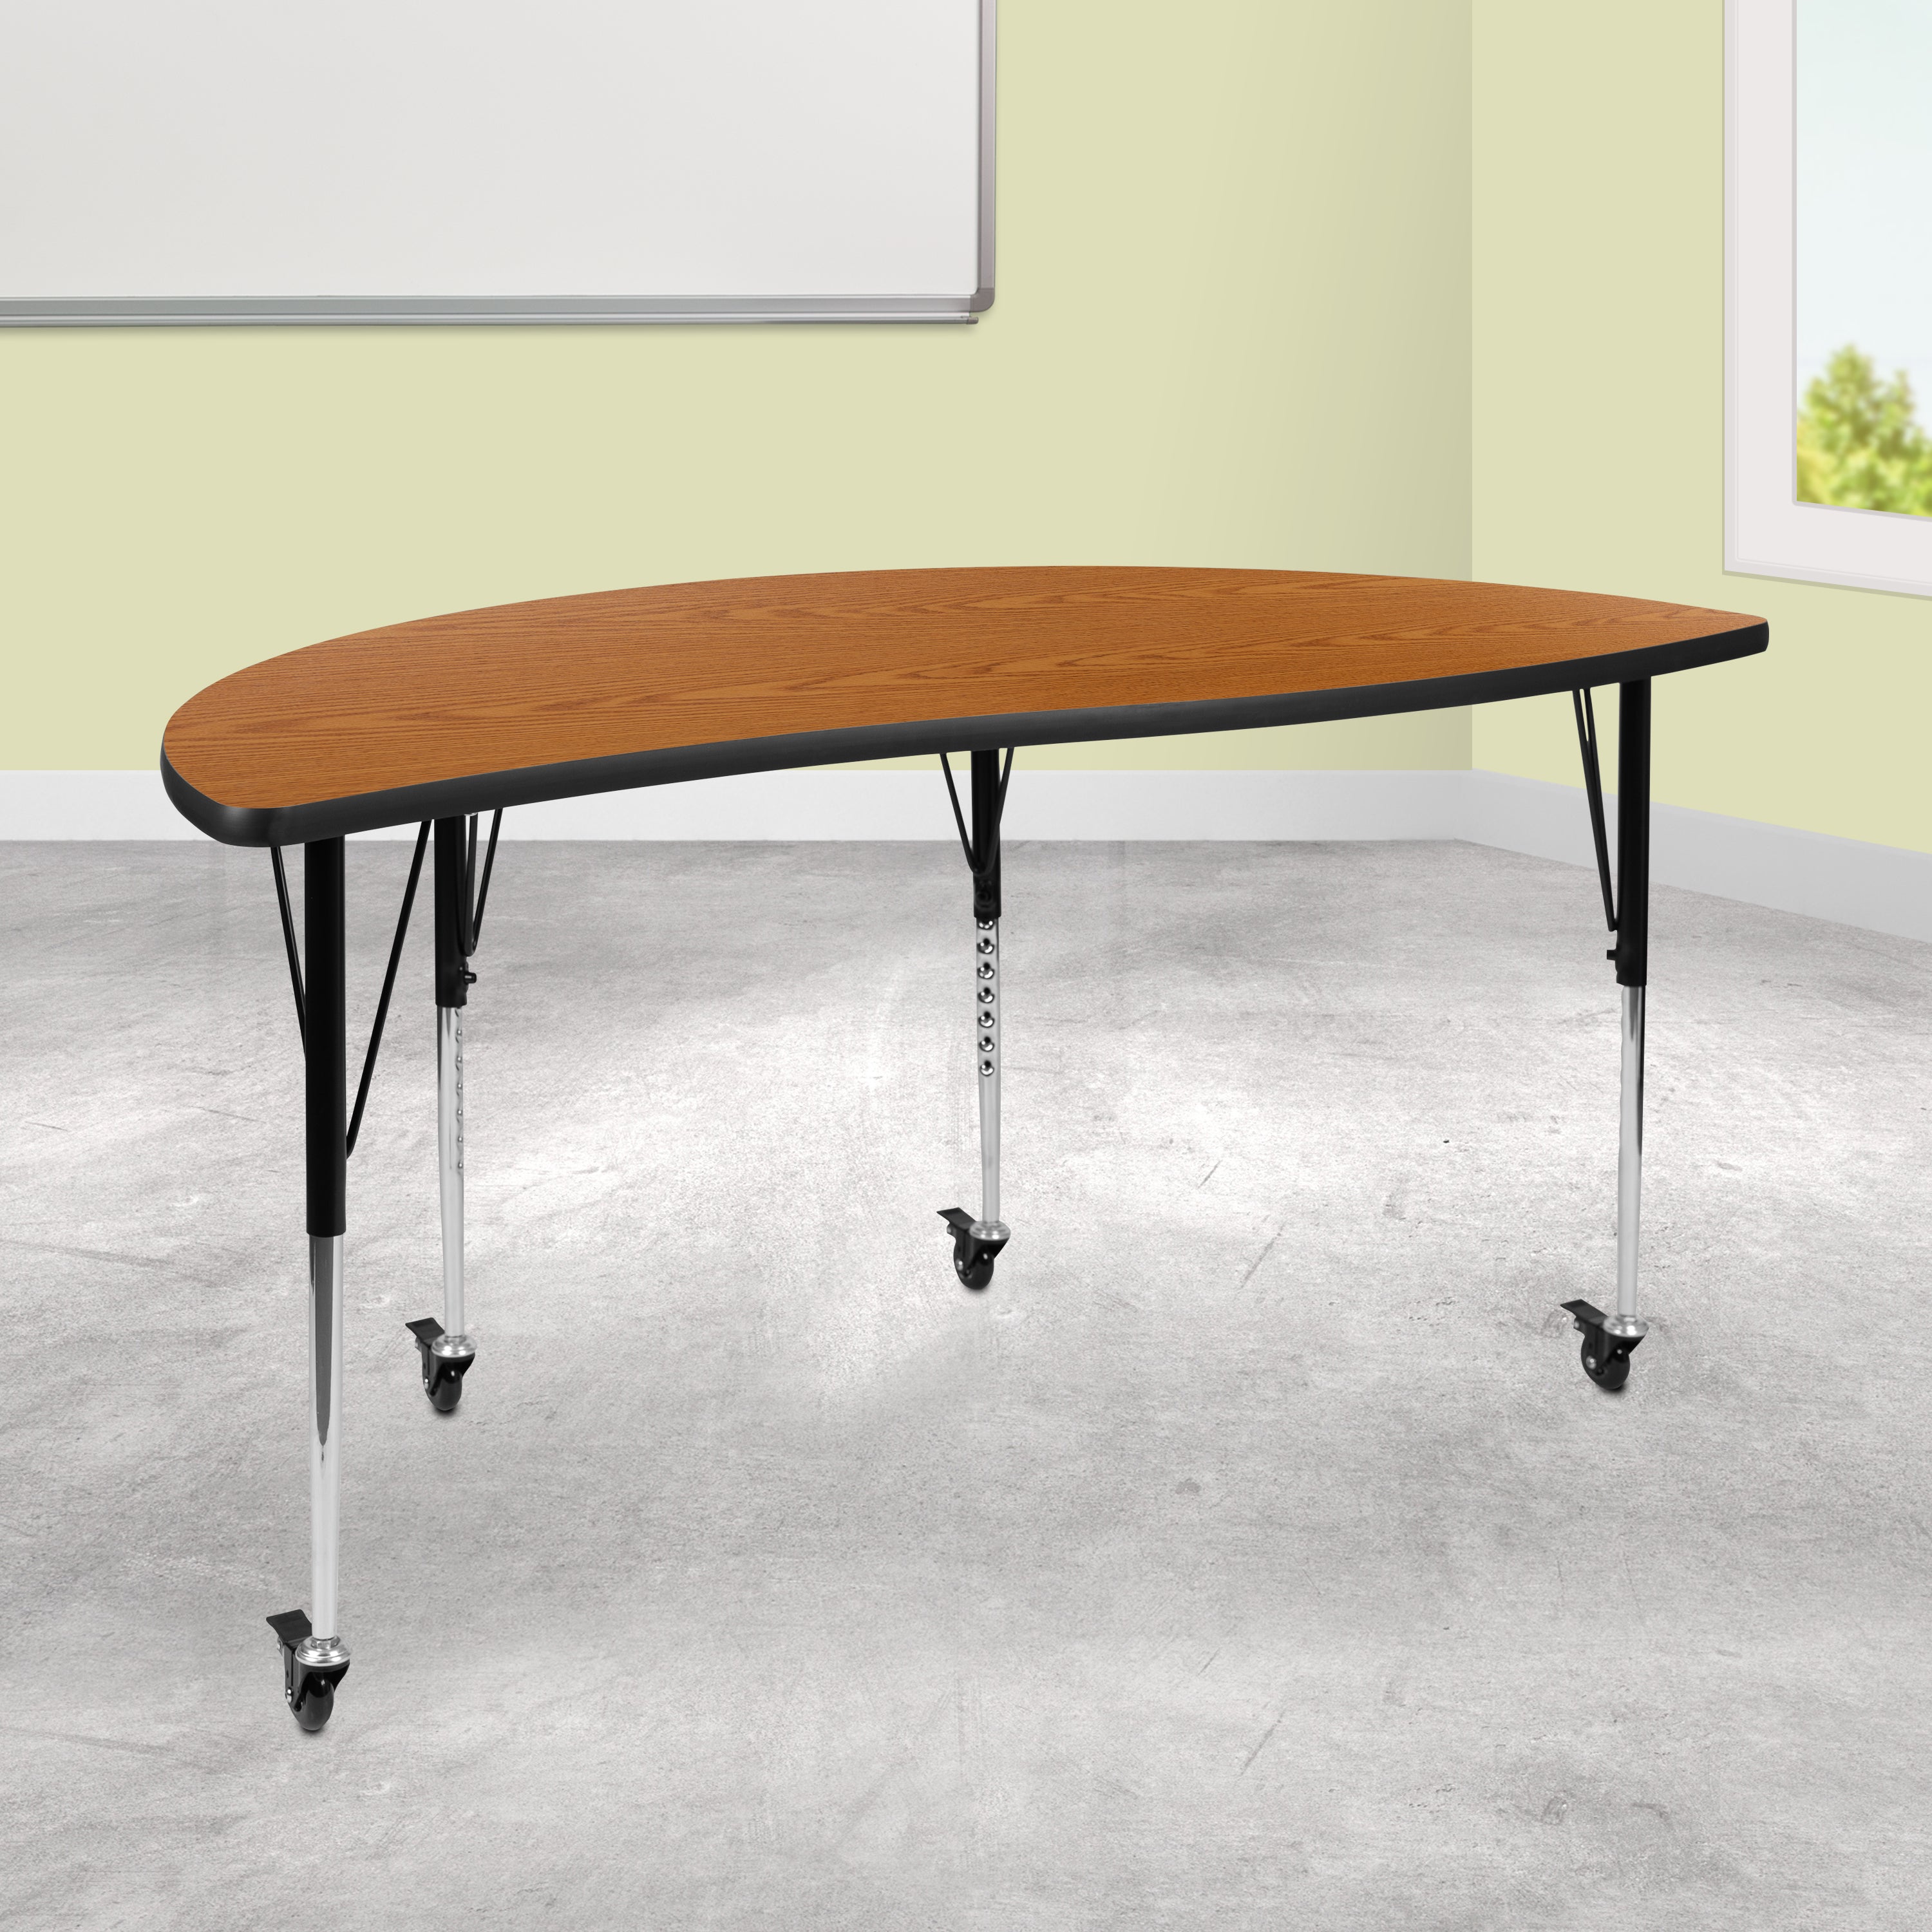 Mobile 60" Half Circle Wave Flexible Collaborative Thermal Laminate Activity Table - Standard Height Adjustable Legs-Collaborative Half Circle Activity Table-Flash Furniture-Wall2Wall Furnishings